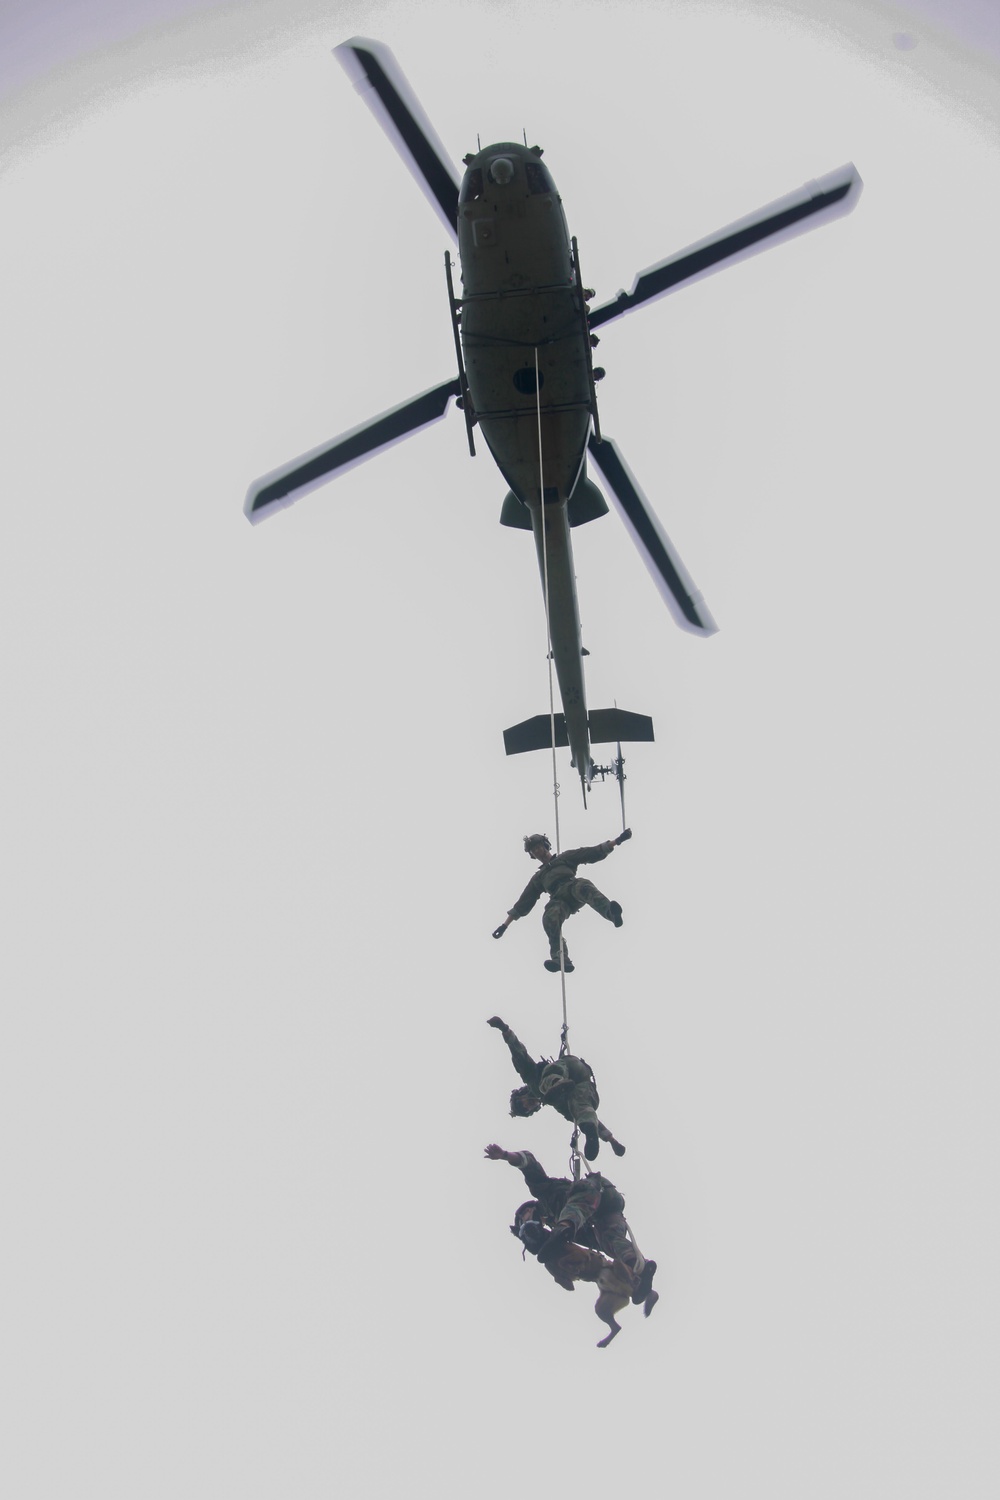 Insertion/extraction training